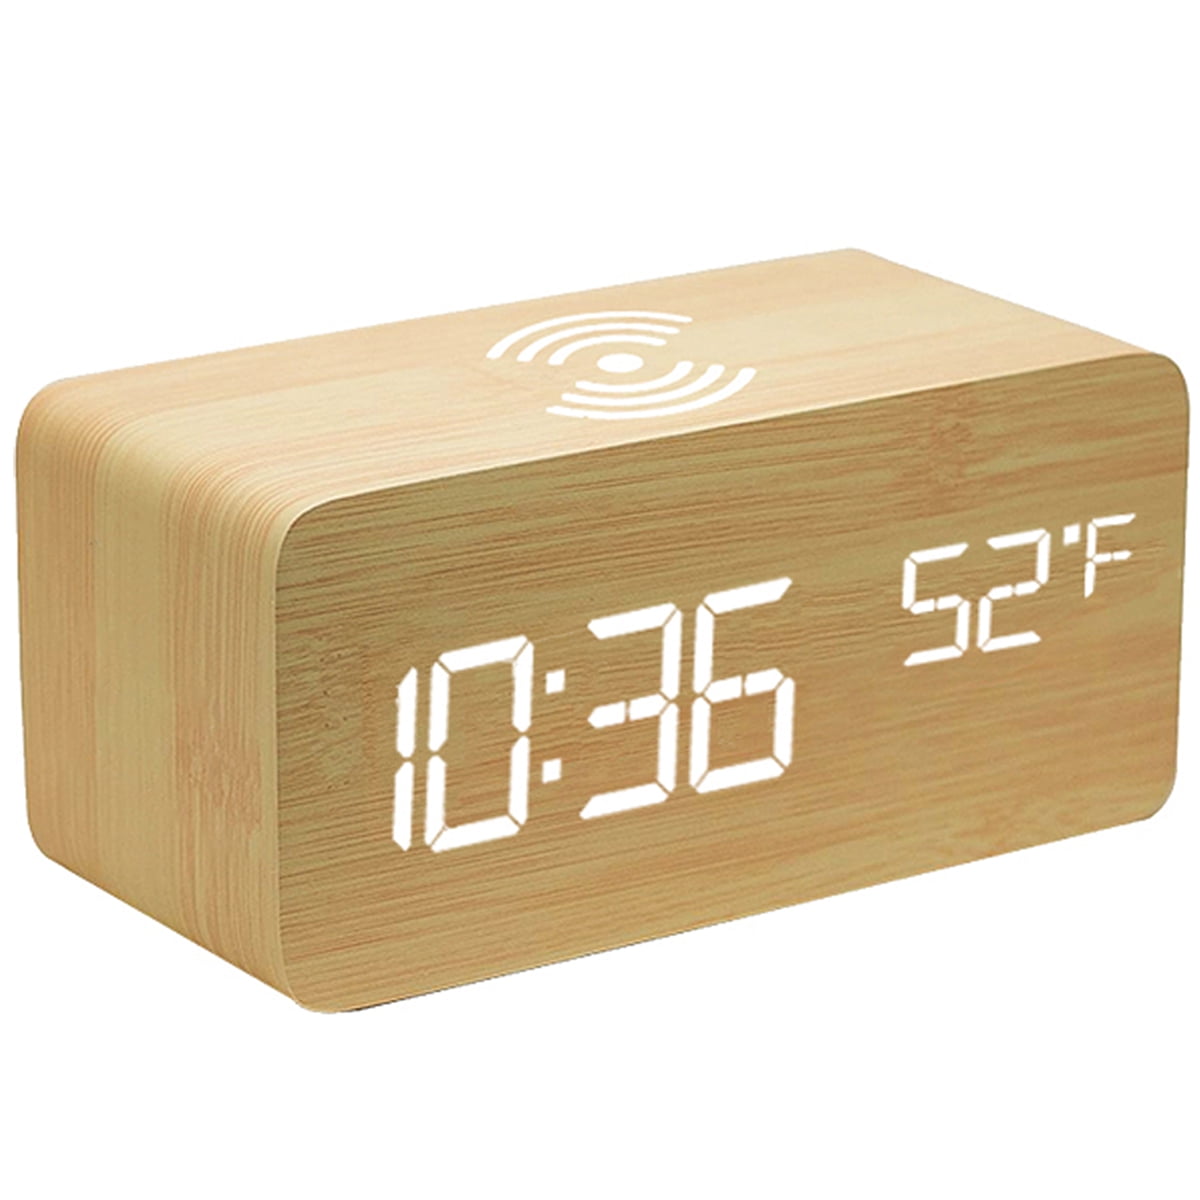 Modern Wooden Wood Digital LED Desk Alarm Clock Thermometer Qi Wireless Charger 